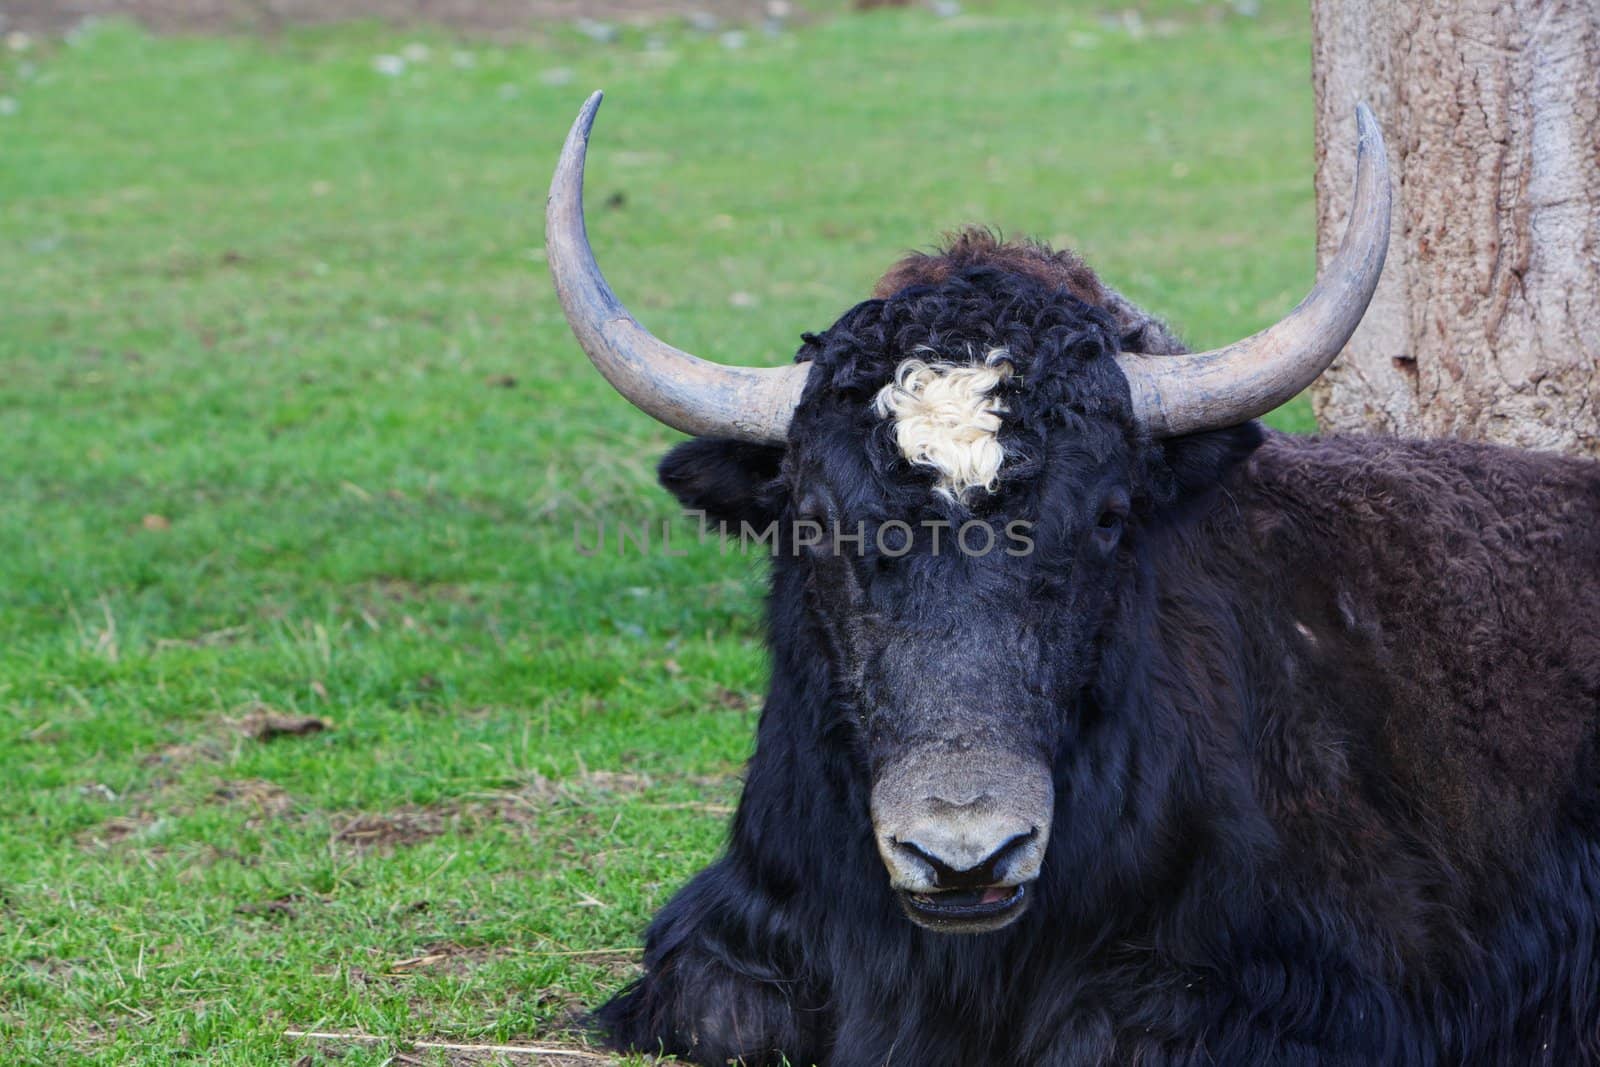 White spotted horned black yak resting in grass